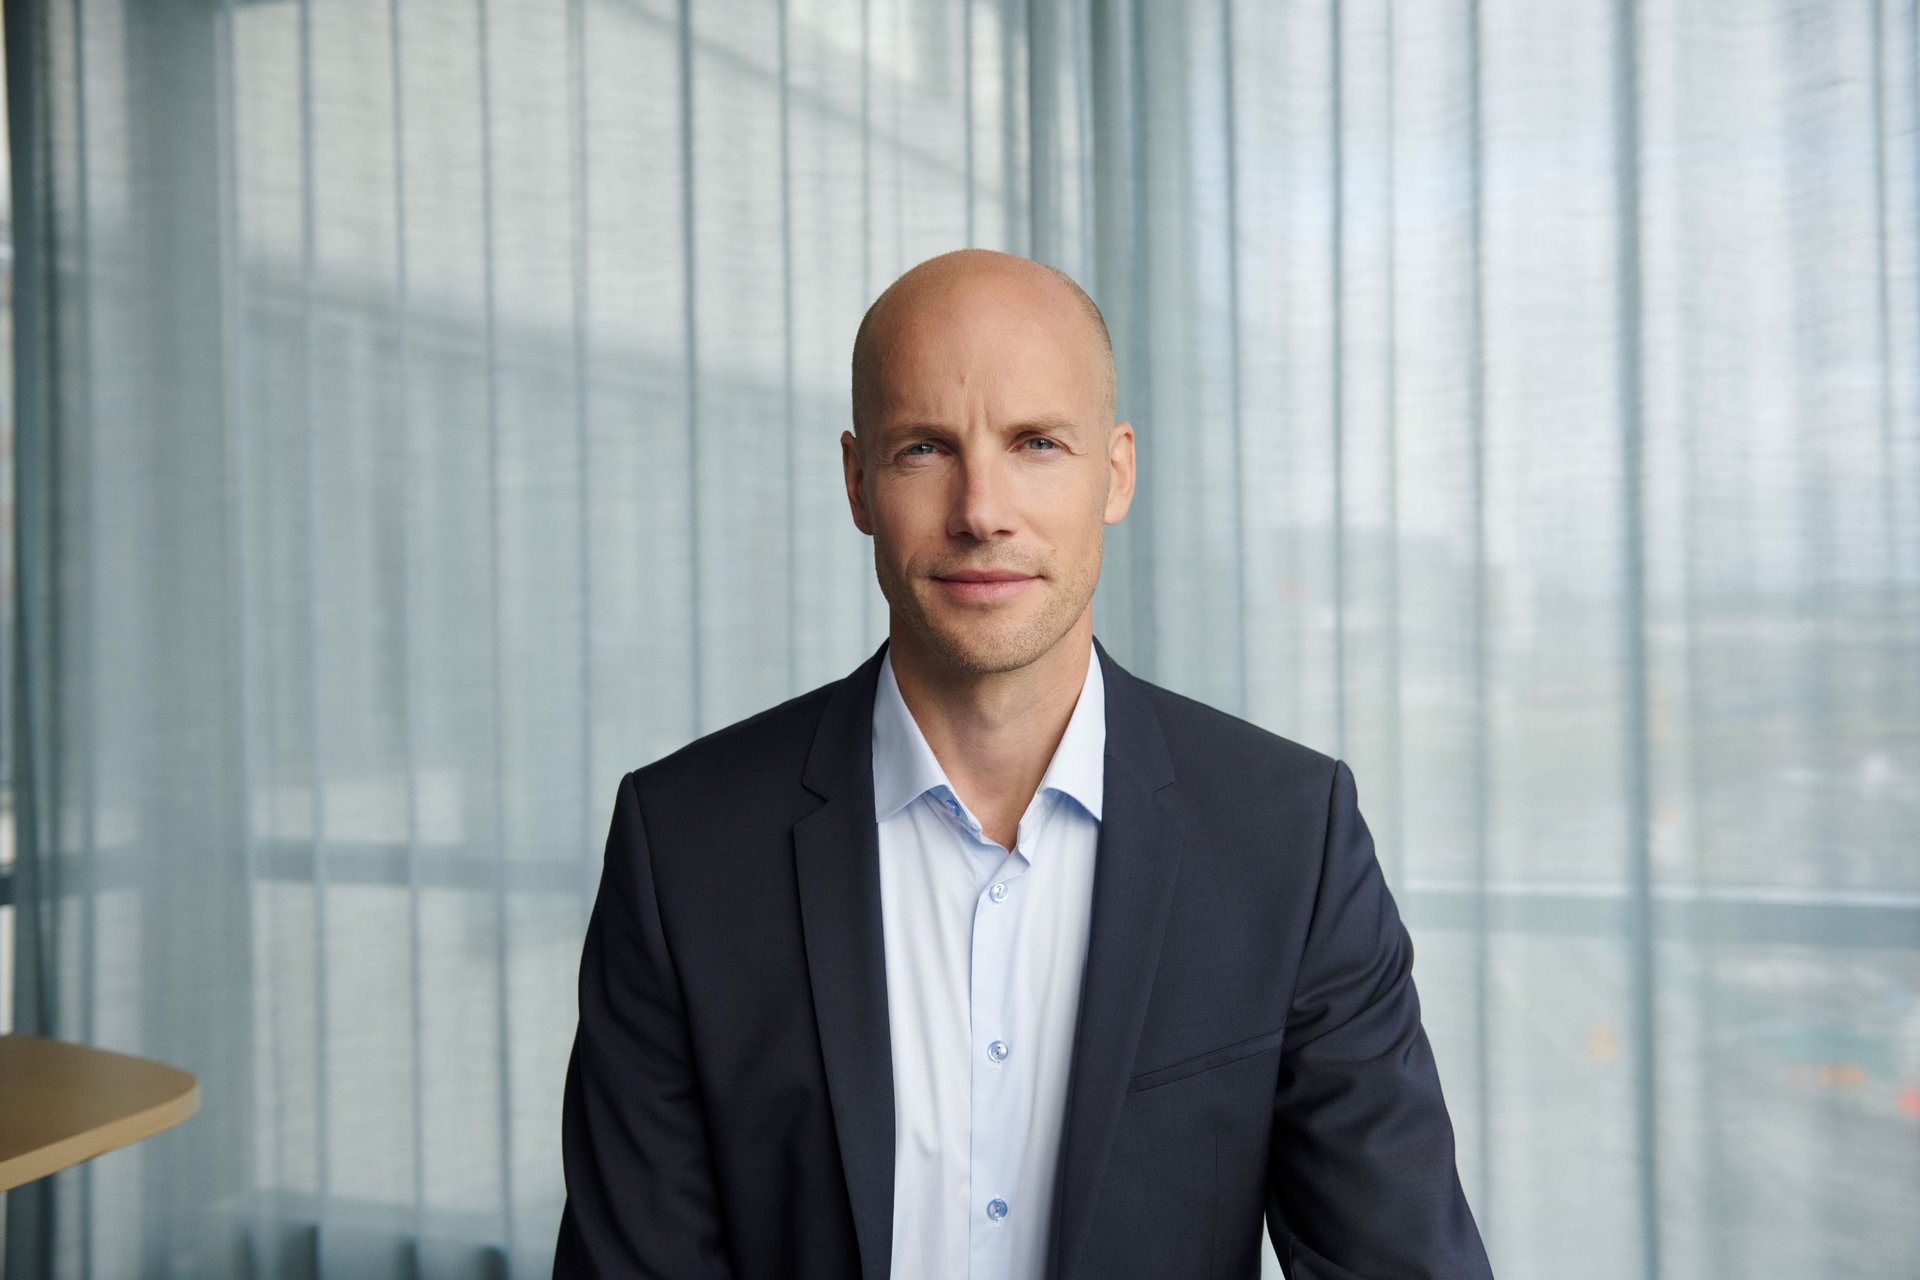 <p><span><span><strong>Adapteo Group, the leading provider of adaptable buildings in Northern Europe, announces the appointment of Ola Skogö as the new Managing Director for Adapteo Sweden and EVP Sweden and Norway. Ola Skogö assumed the new position on 24 April and reports directly to Johanna Persson, President and CEO, Adapteo Group</strong><span>.</span></span></span></p>

<p><span><span>Ola Skogö, was recruited to Adapteo Group’s management team as head of Business Area for Finland, Norway and Denmark in 2021 and has played a key role in Adapteos rapid growth journey. As Adapteo now continues its expansion, Ola Skogö will take over the operational lead for Adapteo Sweden as Managing Director while remaining his responsibility for the Norwegian businesses.</span></span></p>

<p><span><span>&nbsp;</span></span></p>

<p><span><span>We are delighted to welcome Ola as he steps into his new role leading operations in Adapteo's largest market. With his impressive commercial background gained from holding several leading roles at customer-focused service companies, as well as his experience working within Adapteo Group, Ola is an invaluable asset to the company as we continue to expand our business in Sweden,” said Johanna Persson, President and CEO of Adapteo Group. </span></span></p>

<p><span><span><span>&nbsp;</span></span></span></p>

<p><span><span>Before joining Adapteo, Ola held the role as Managing Director at Aviator Sweden, an aviation service provider offering ground services to Swedish airports and airlines. Prior to that, he held several executive level roles at the facility management service company Coor, both in Sweden and internationally. In his new role at Adapteo Sweden he will be responsible for leading the Swedish operations and ensuring the continued success of its sustainable adaptable building solutions.</span></span></p>

<p><span><span>&nbsp;</span></span></p>

<p><span><span>"I am honored to take on this role. Adapteo Sweden has had an impressive journey, and I am excited to continue developing our offerings and building adaptable societies in collaboration with our brilliant team and customers across Sweden", said Ola Skogö, newly appointed Managing Director for Adapteo Sweden and EVP Sweden and Norway.</span></span></p>